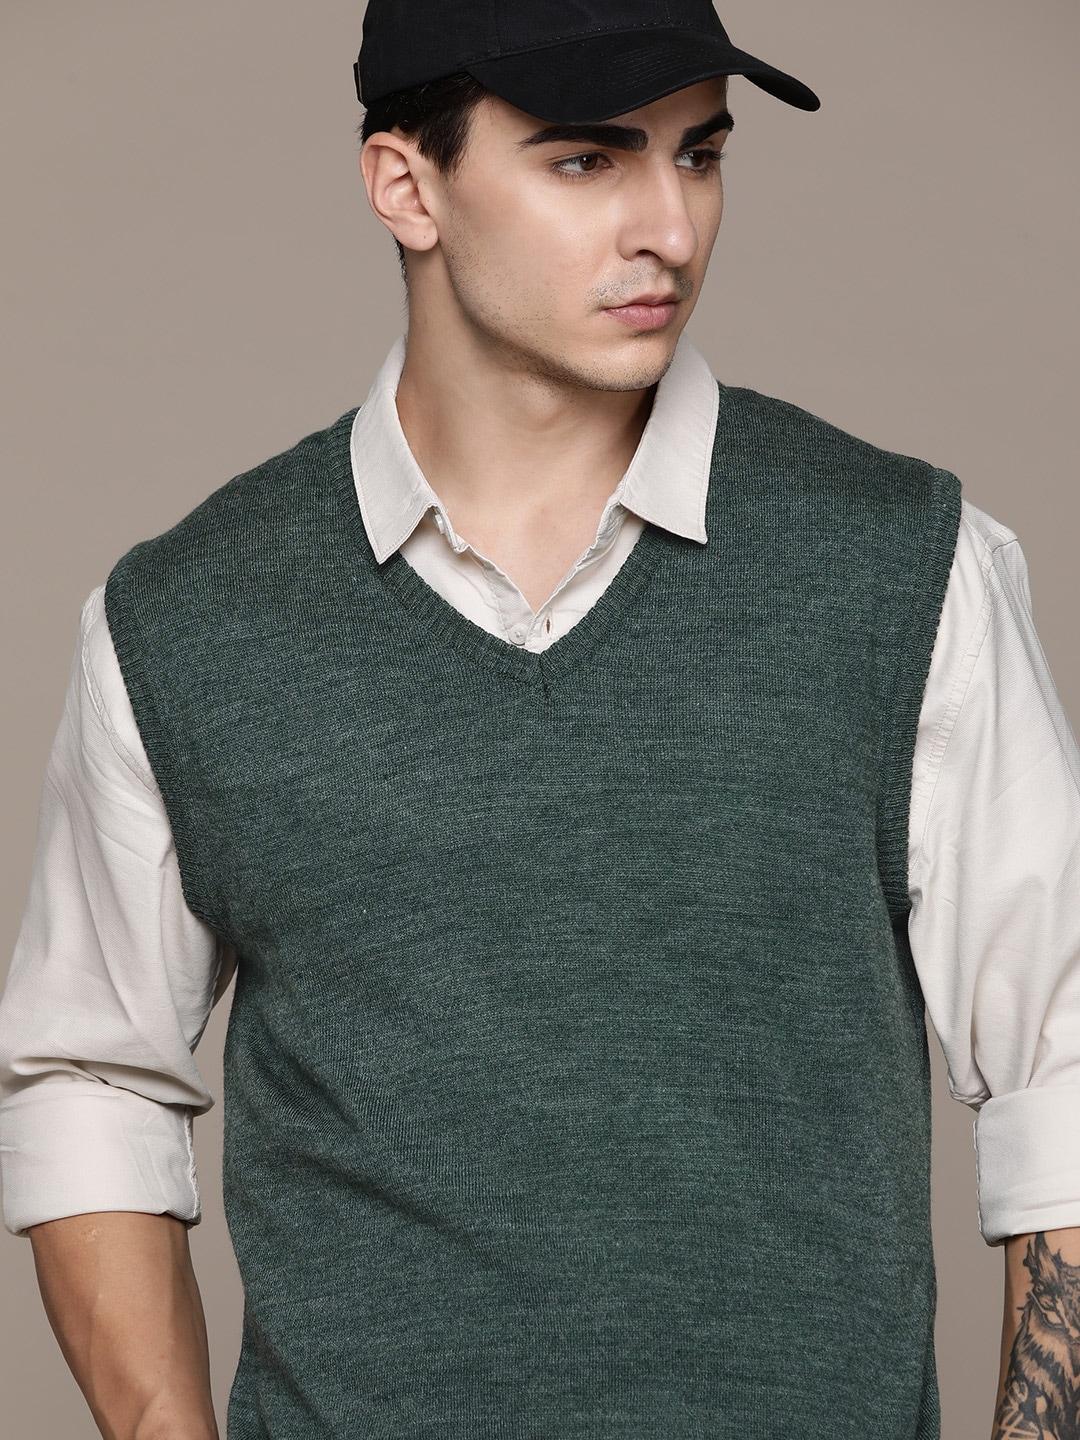 the roadster lifestyle co. solid v-neck acrylic sweater vest